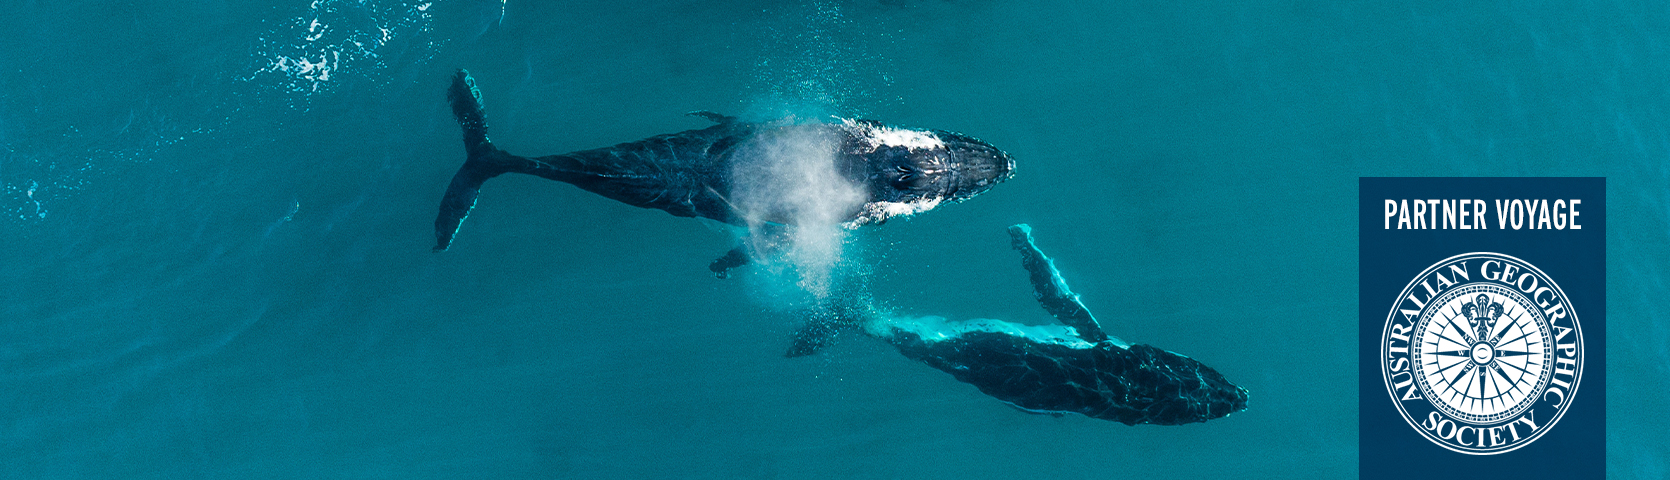 Whales and Trails of Western Australia